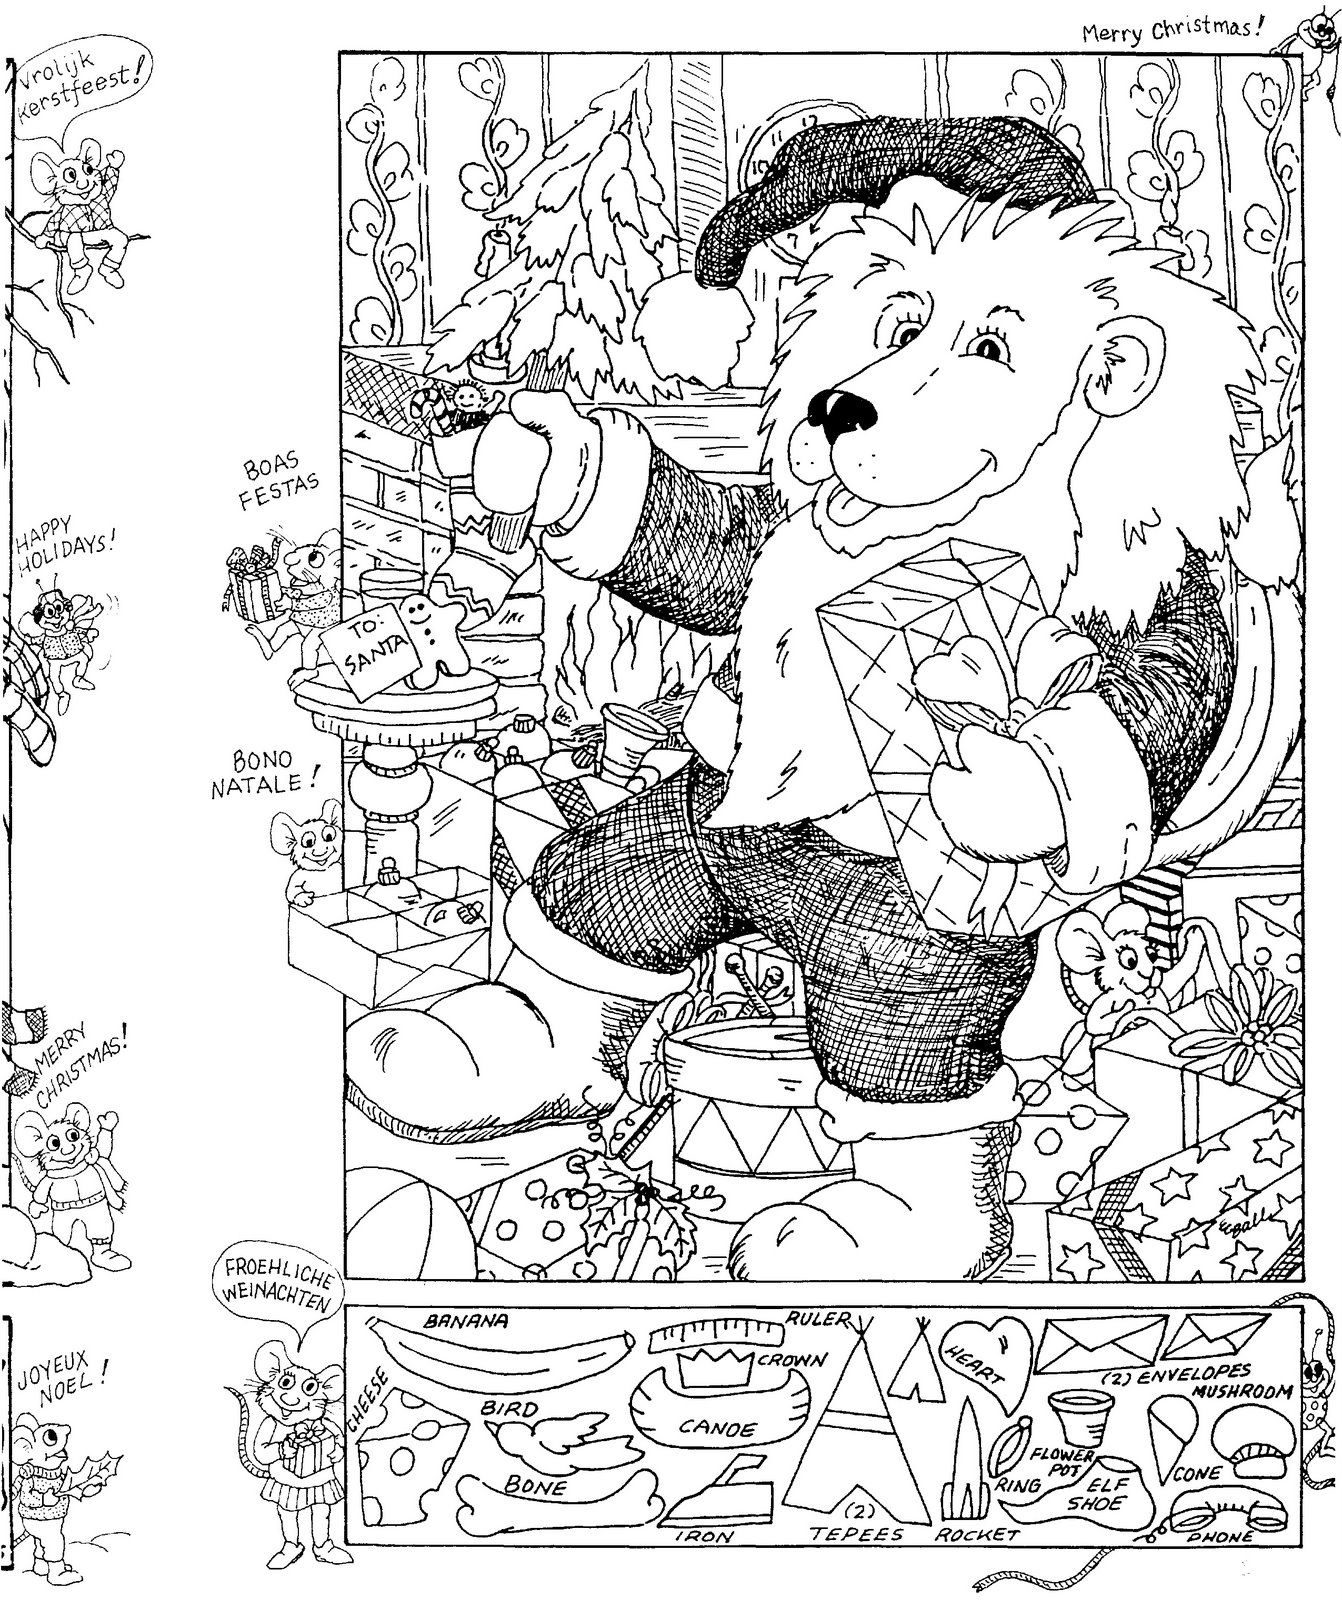 Joyful moments with donna j shepherd christmas hidden picture puzzlecoloring page hidden picture puzzles hidden pictures picture puzzles